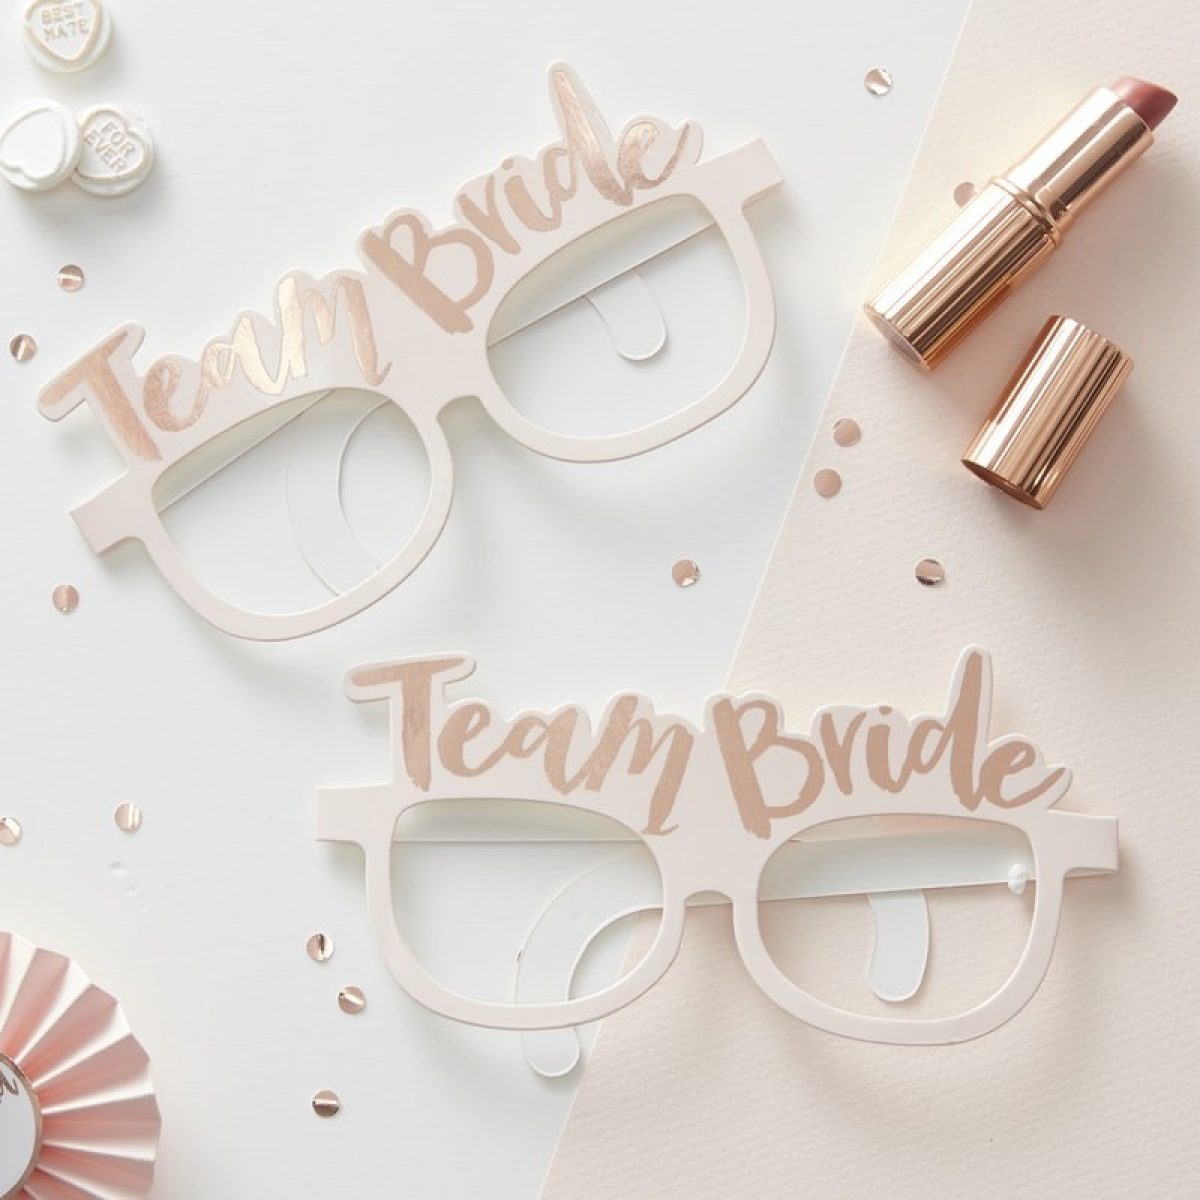 5 DESIGNS TEAM BRIDE HEN PARTY NIGHT CARD GLASSES ACCESSORIES PHOTO PROPS TRIBE 